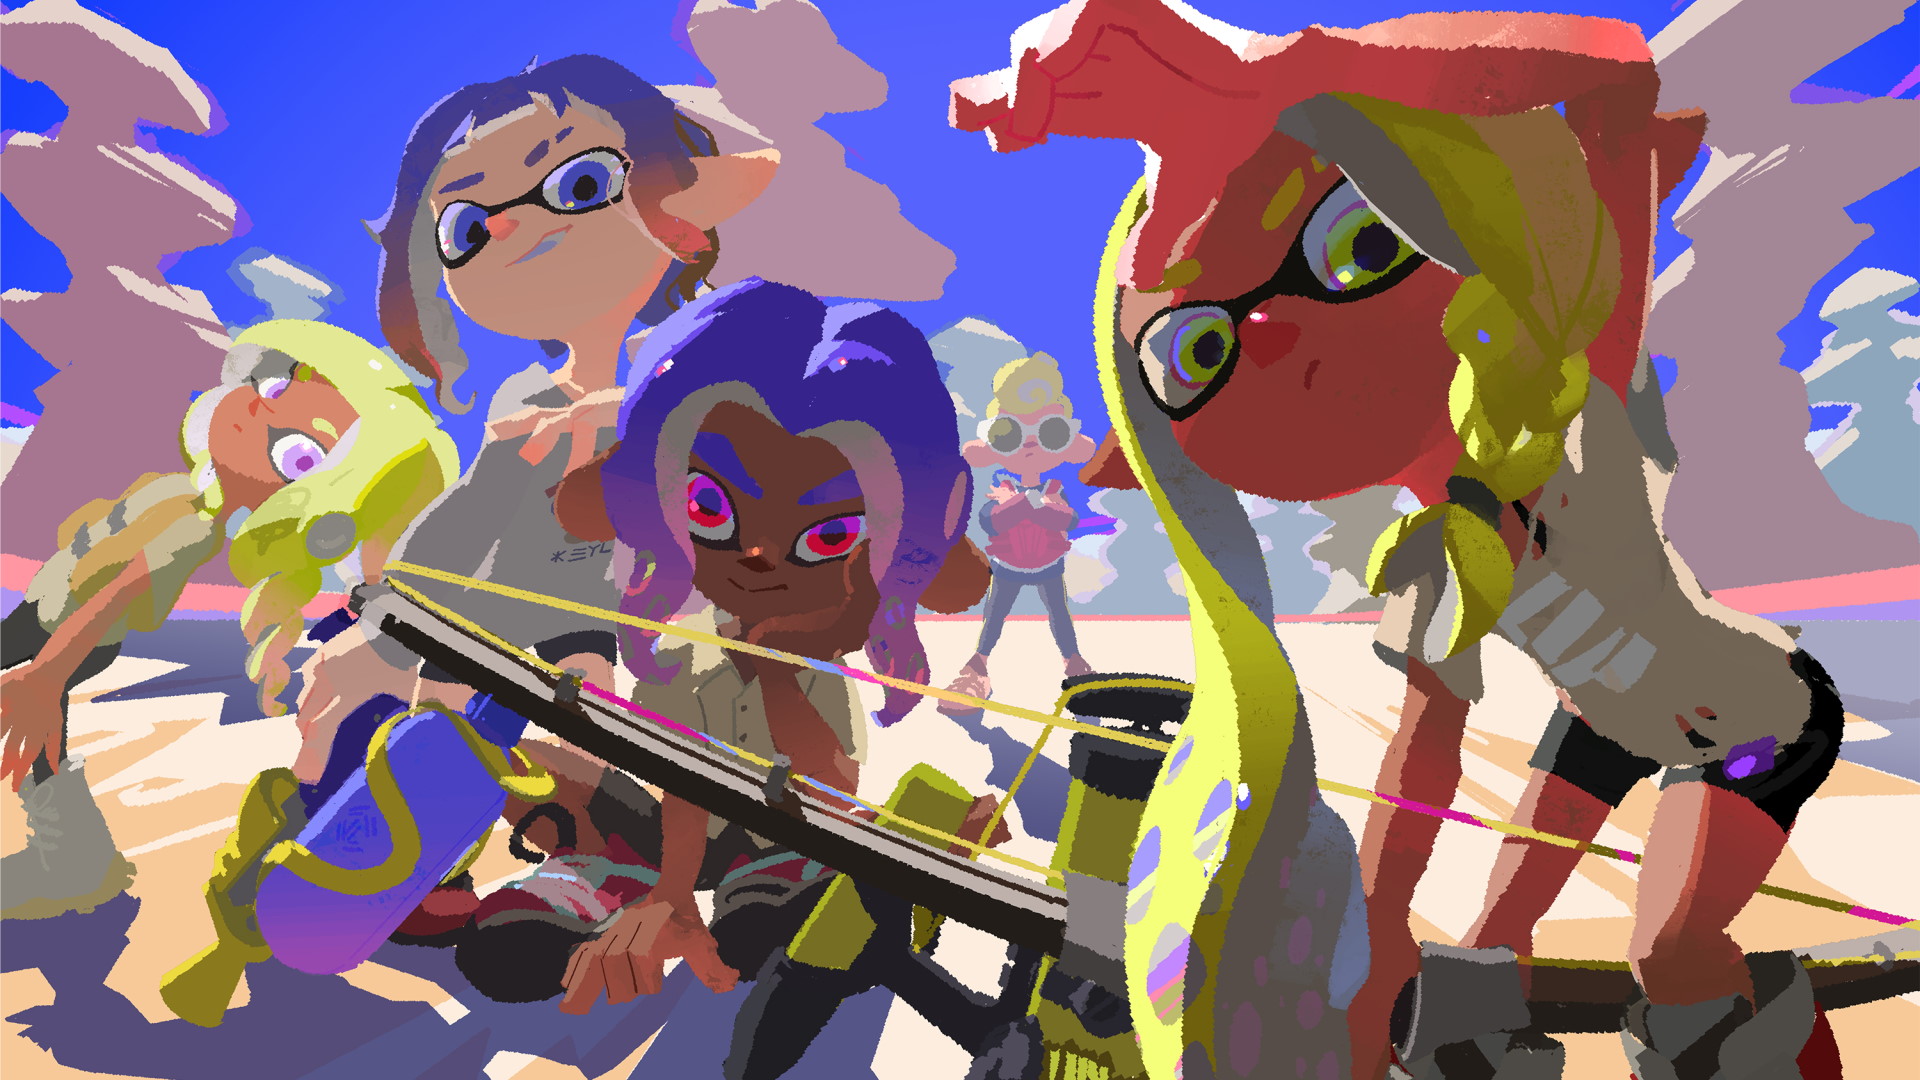 Splatoon 3 art is our first new tease since the big February reveal